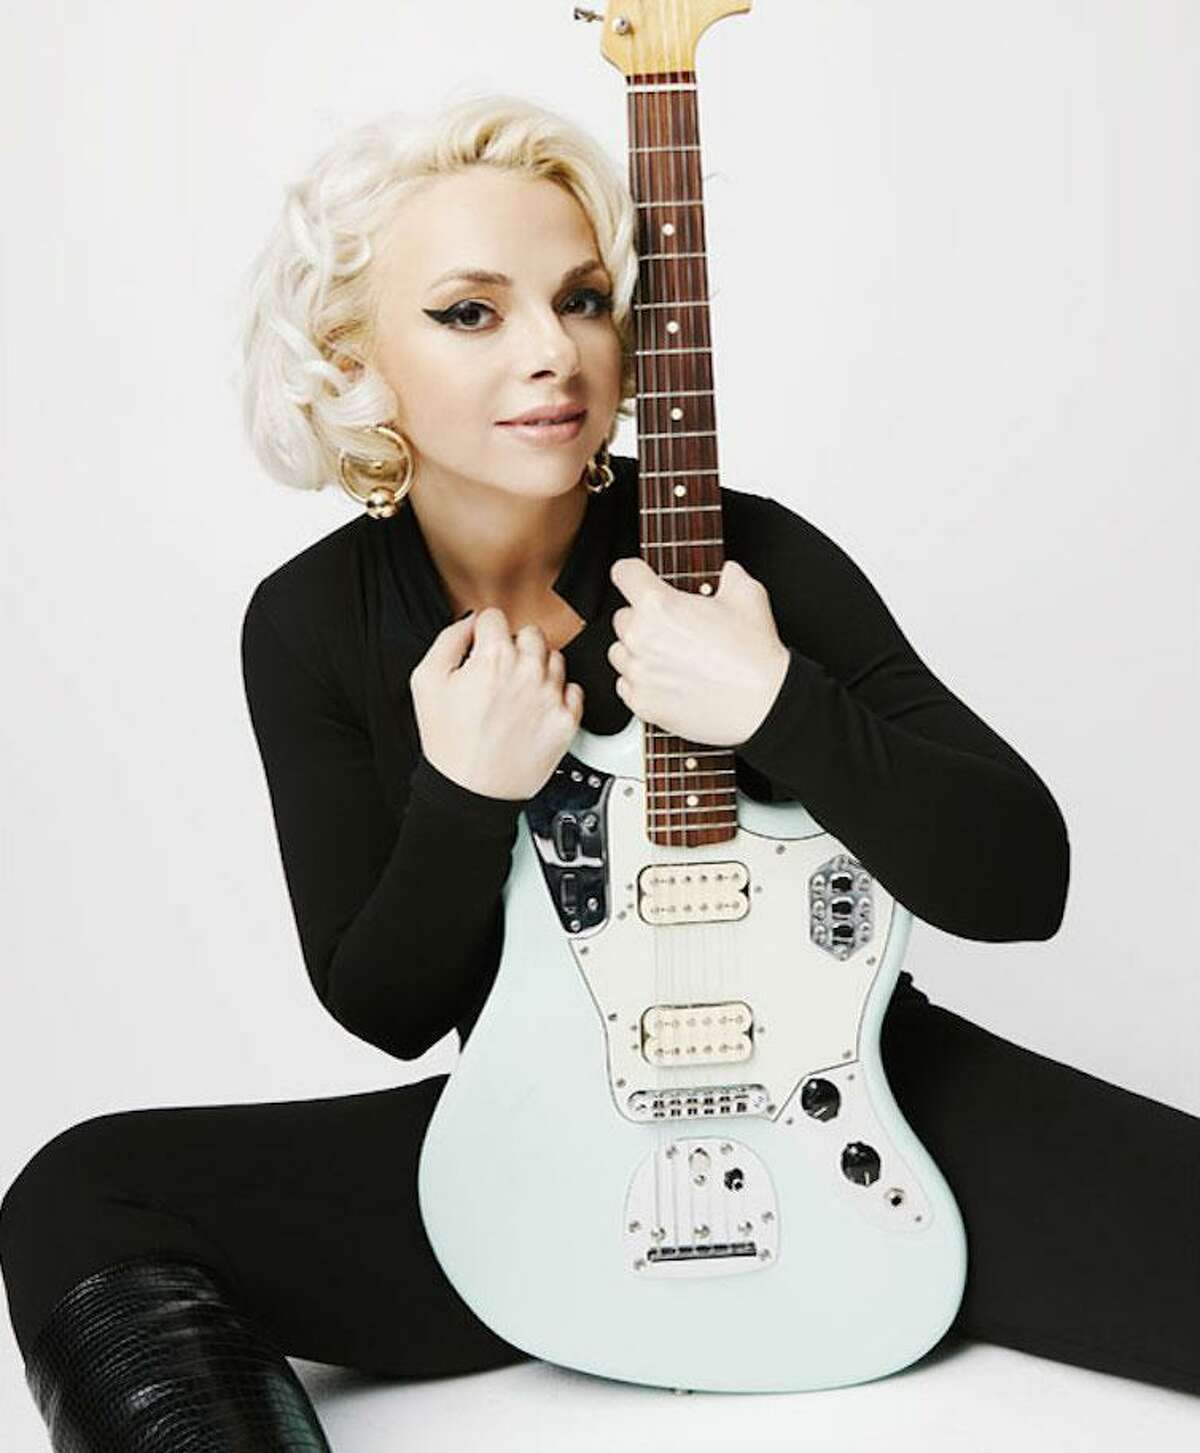 Singer, songwriter and guitarist Samantha Fish is set to perform at Infinity Hall in Norfolk Thursday, Nov. 4.